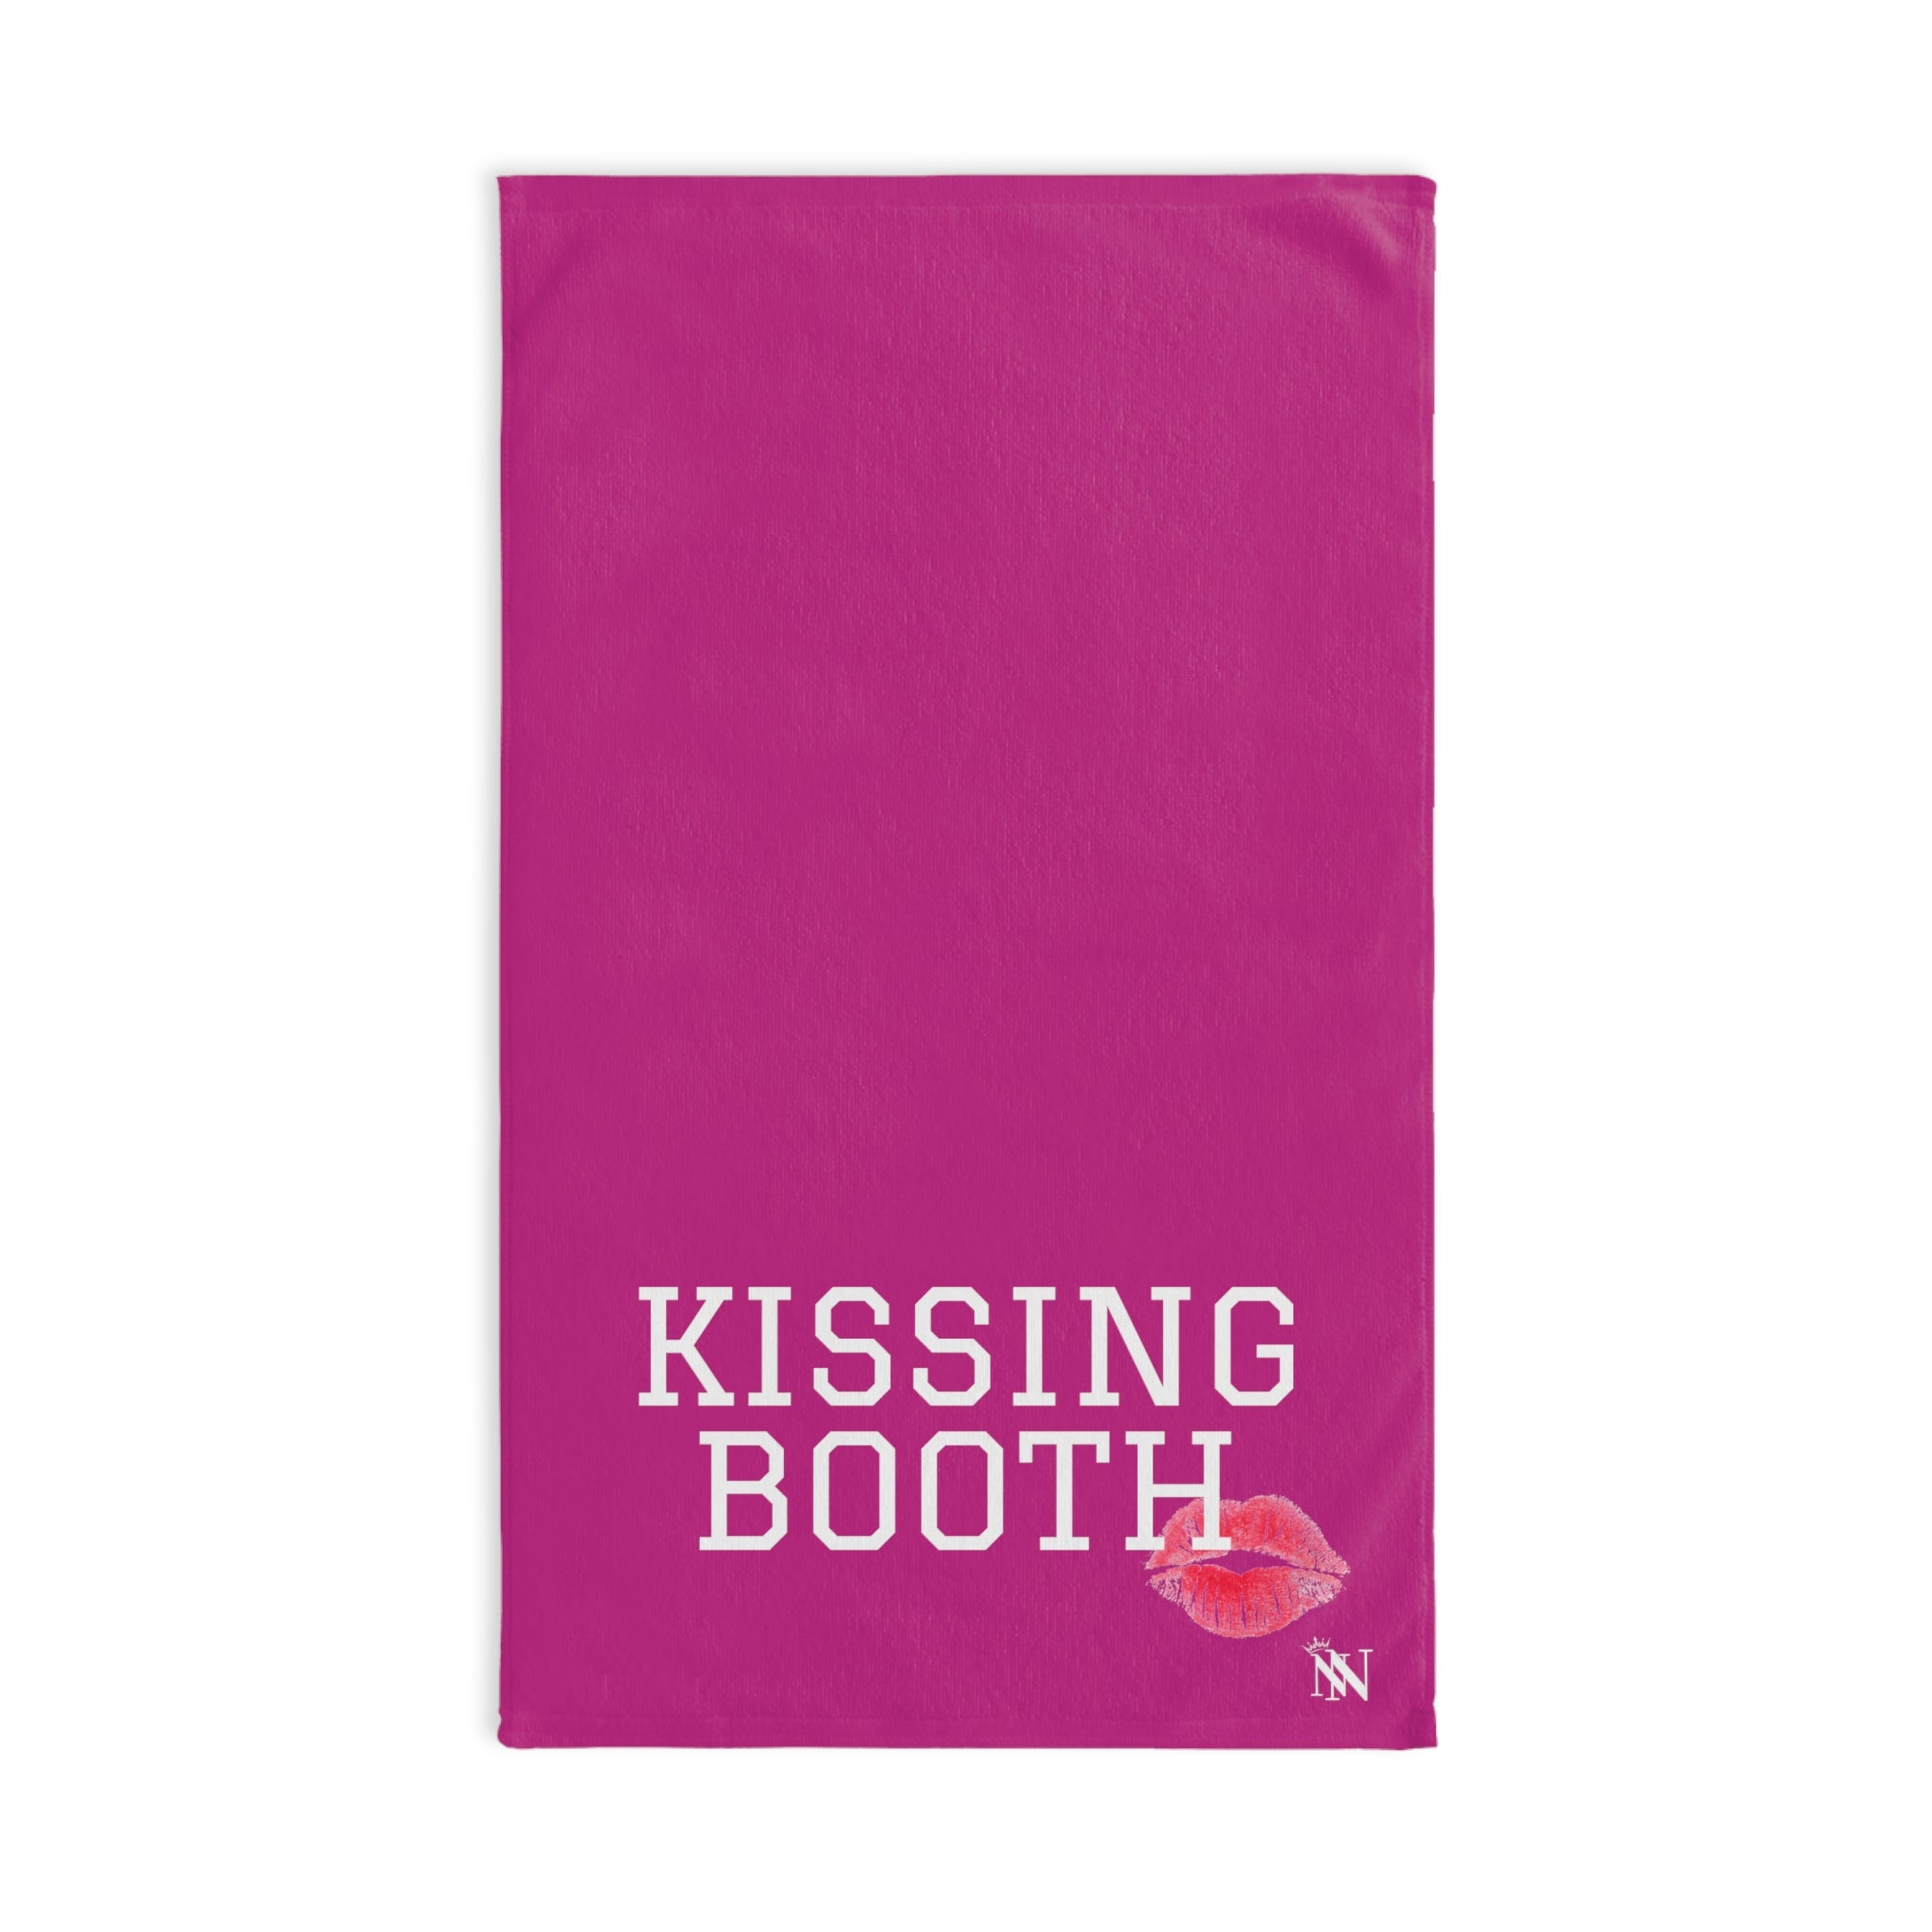 Lips Kiss BoothFuscia | Funny Gifts for Men - Gifts for Him - Birthday Gifts for Men, Him, Husband, Boyfriend, New Couple Gifts, Fathers & Valentines Day Gifts, Hand Towels NECTAR NAPKINS